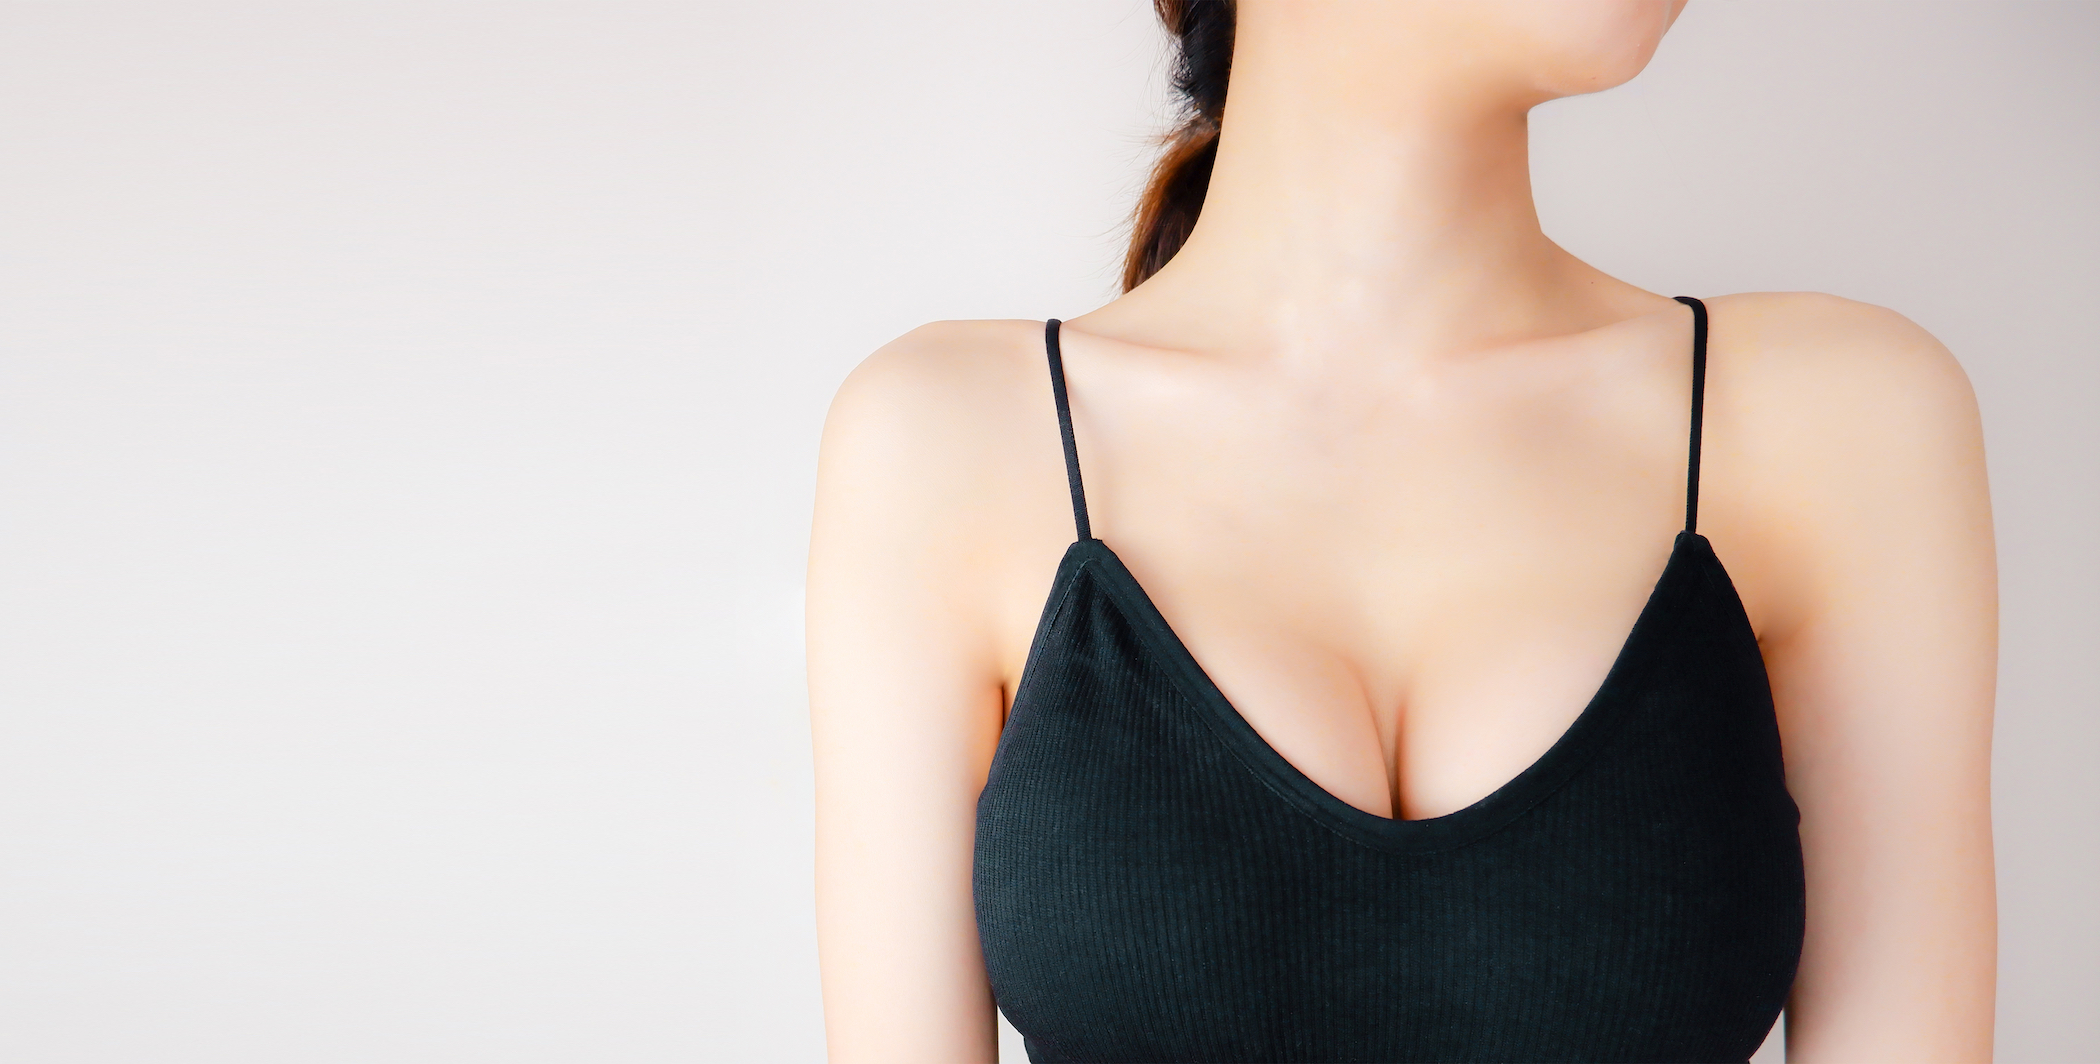 How Small Can Breast Reduction Make My Cup Size?